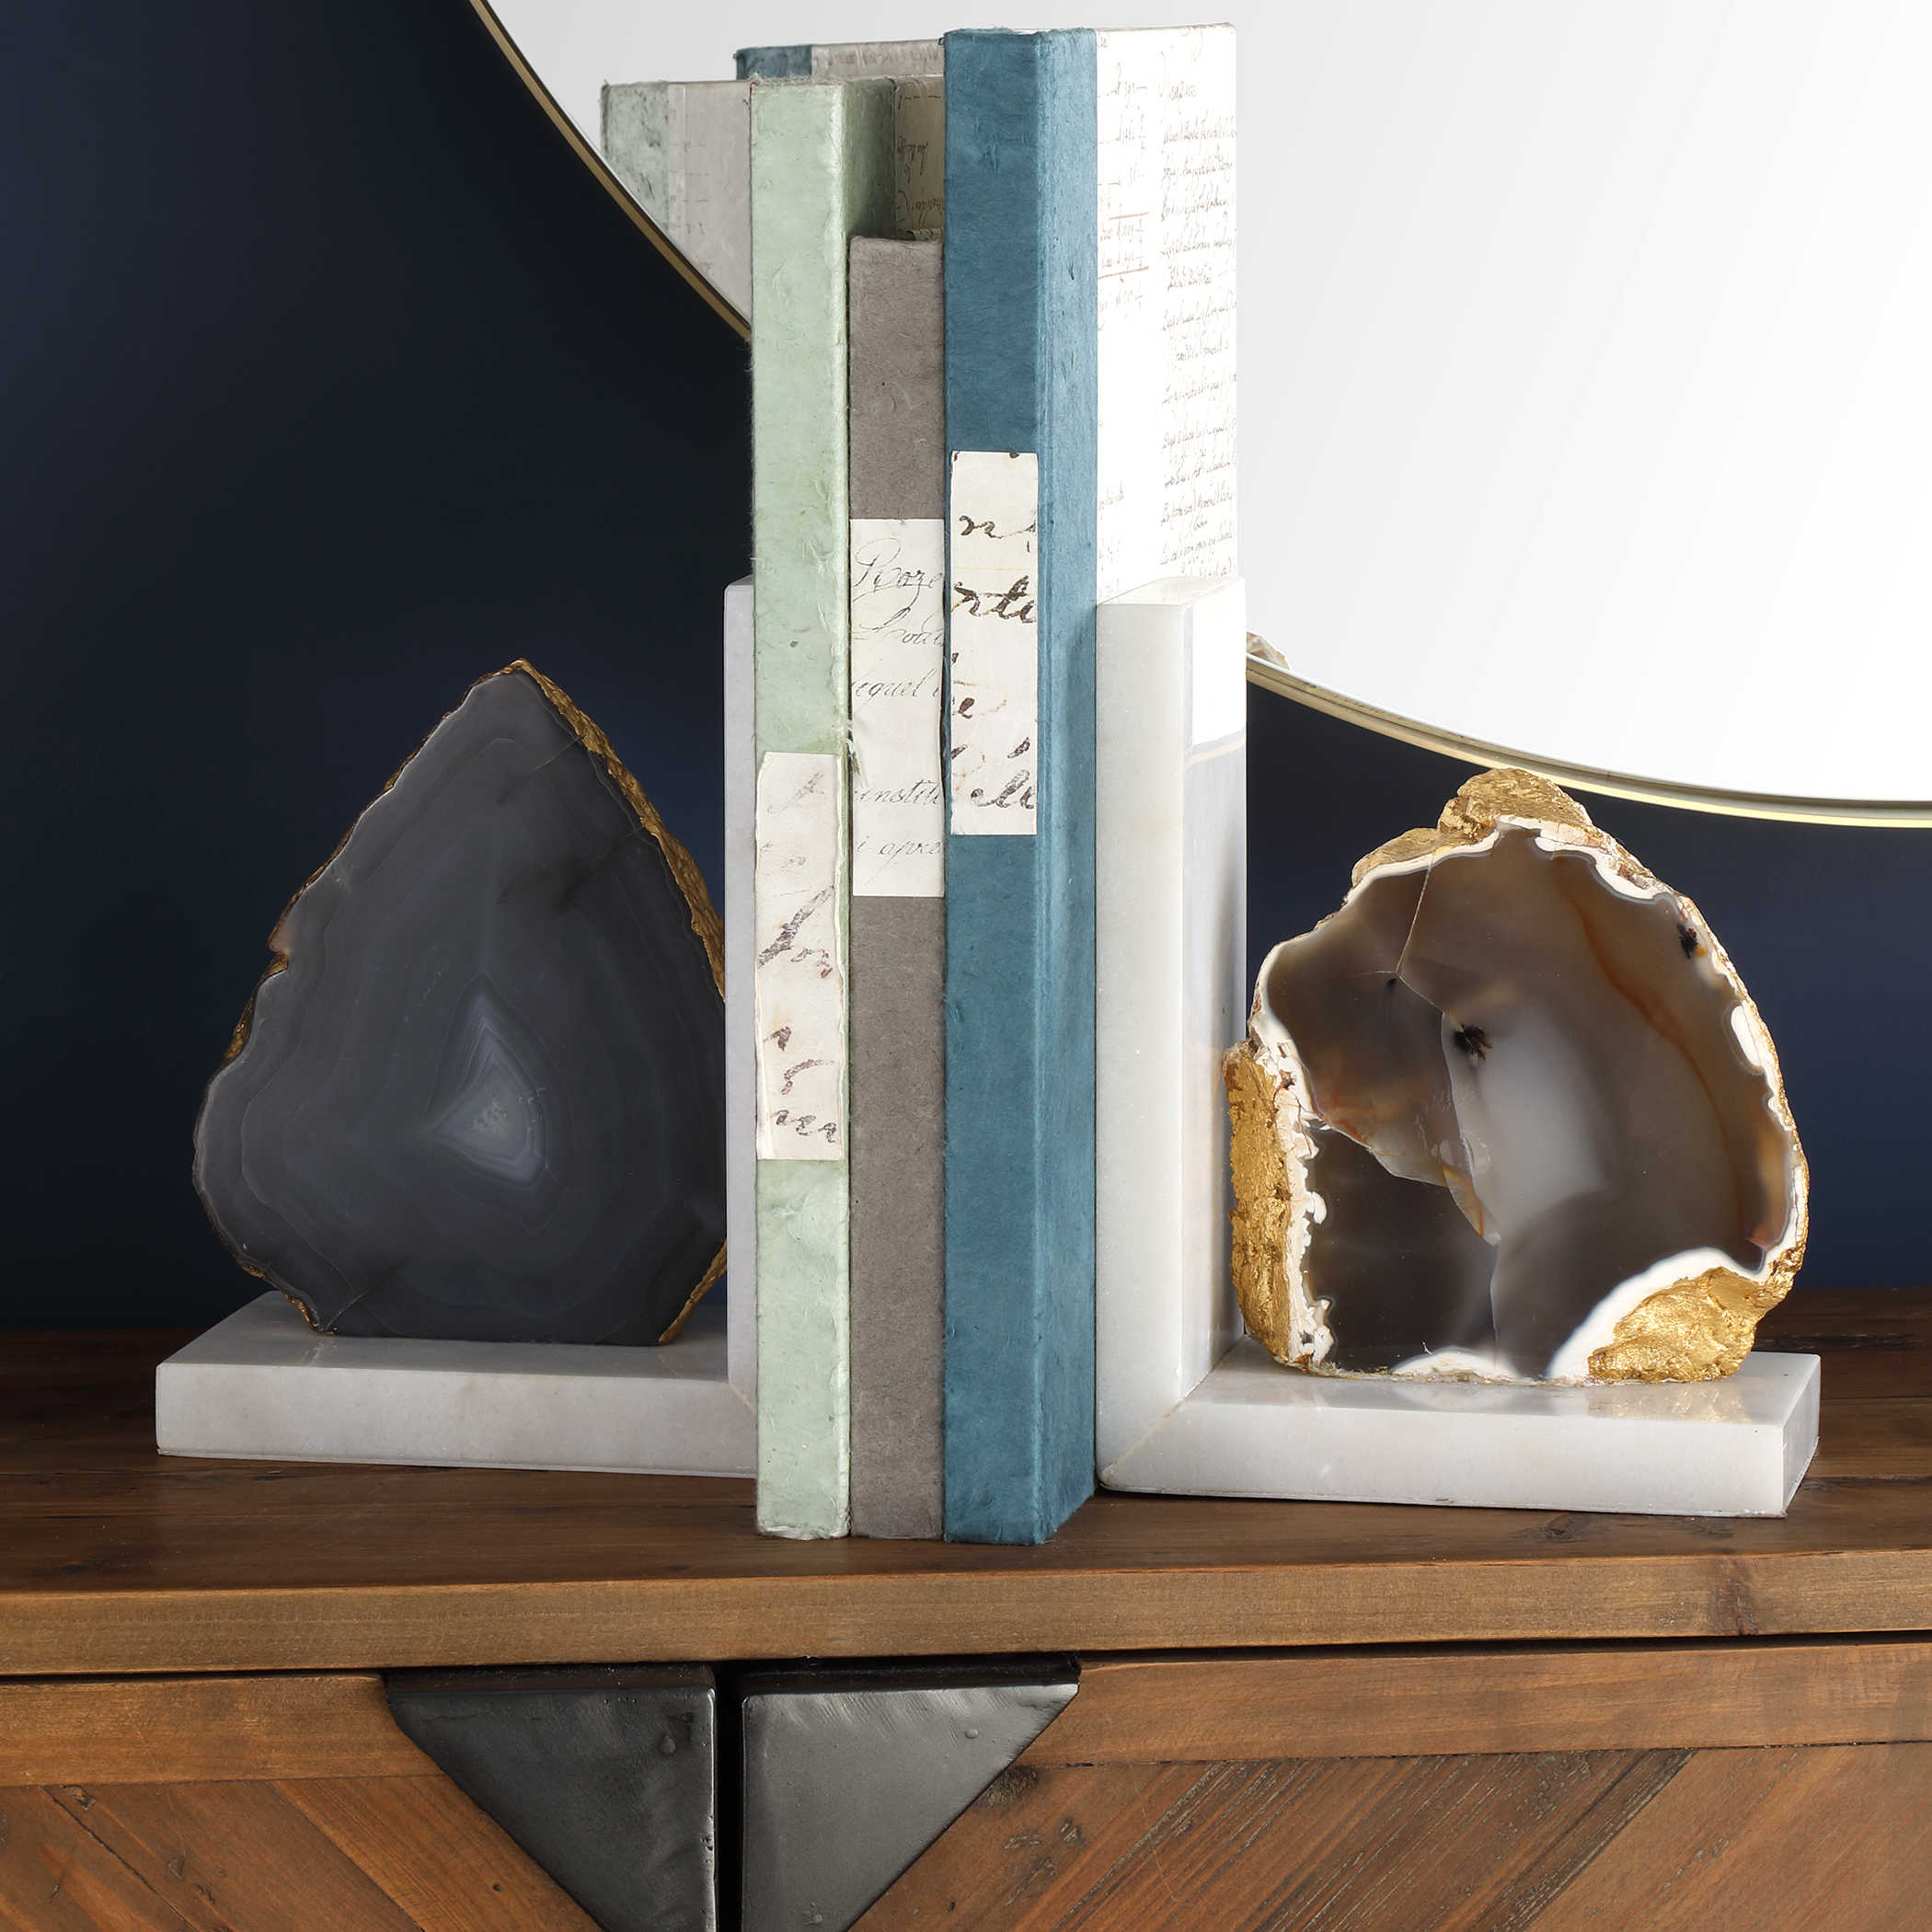 cozy book ends are great Mother's day gifts.